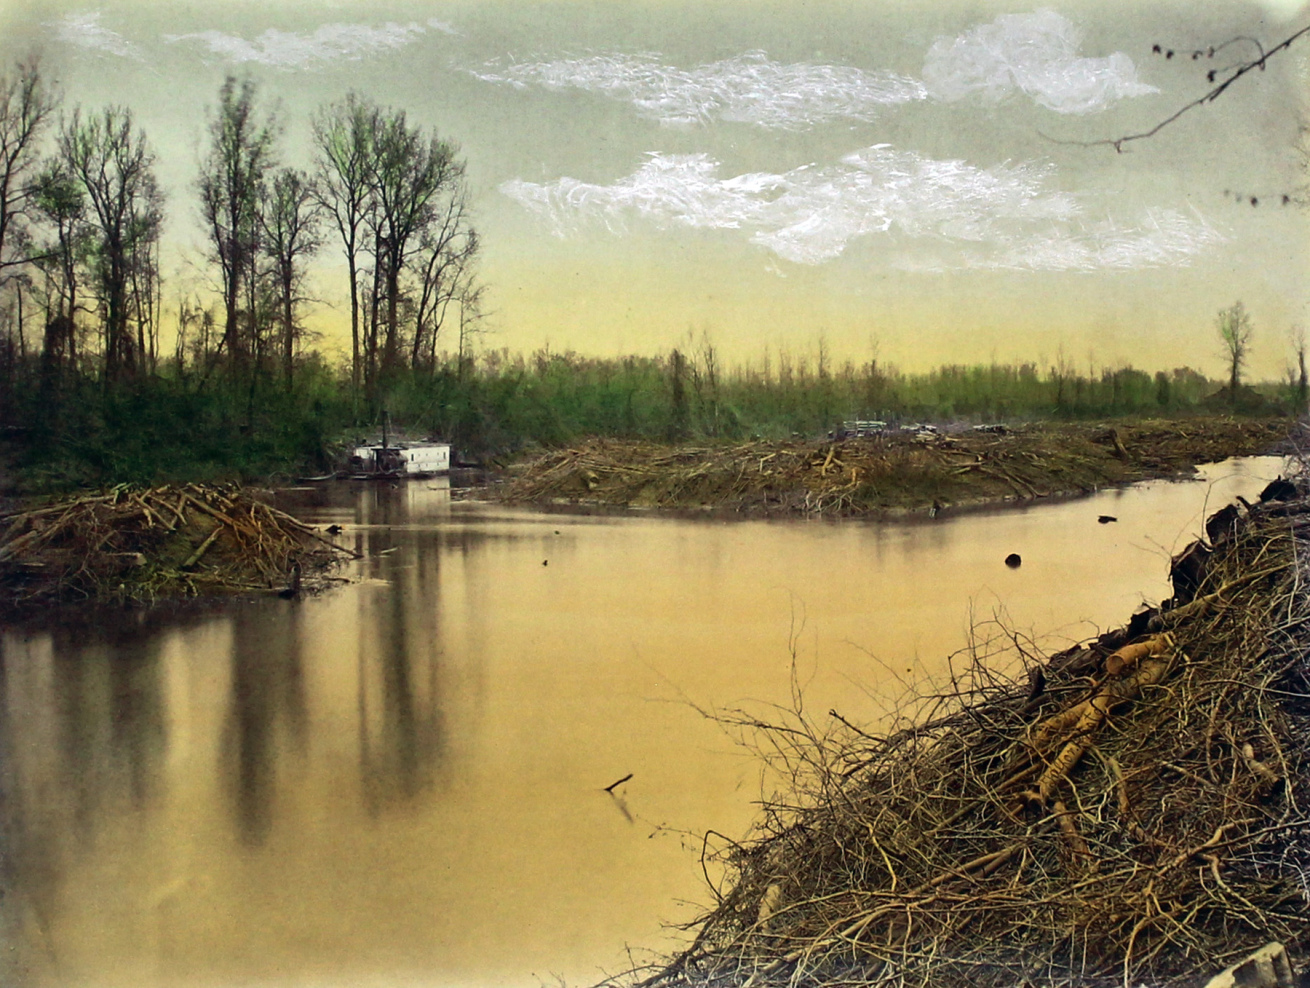 Fotó: Robert B. Talfor<br />Plate VI of the photographic album Photographic Views of Red River Raft<br />1873<br />Hand-coloured albumen print, mounted recto only to pages with a stylised U.S. Corps of Engineers printed border<br />7 x 9¼ inches (17.8 x 23.5 cm)<br /><br />